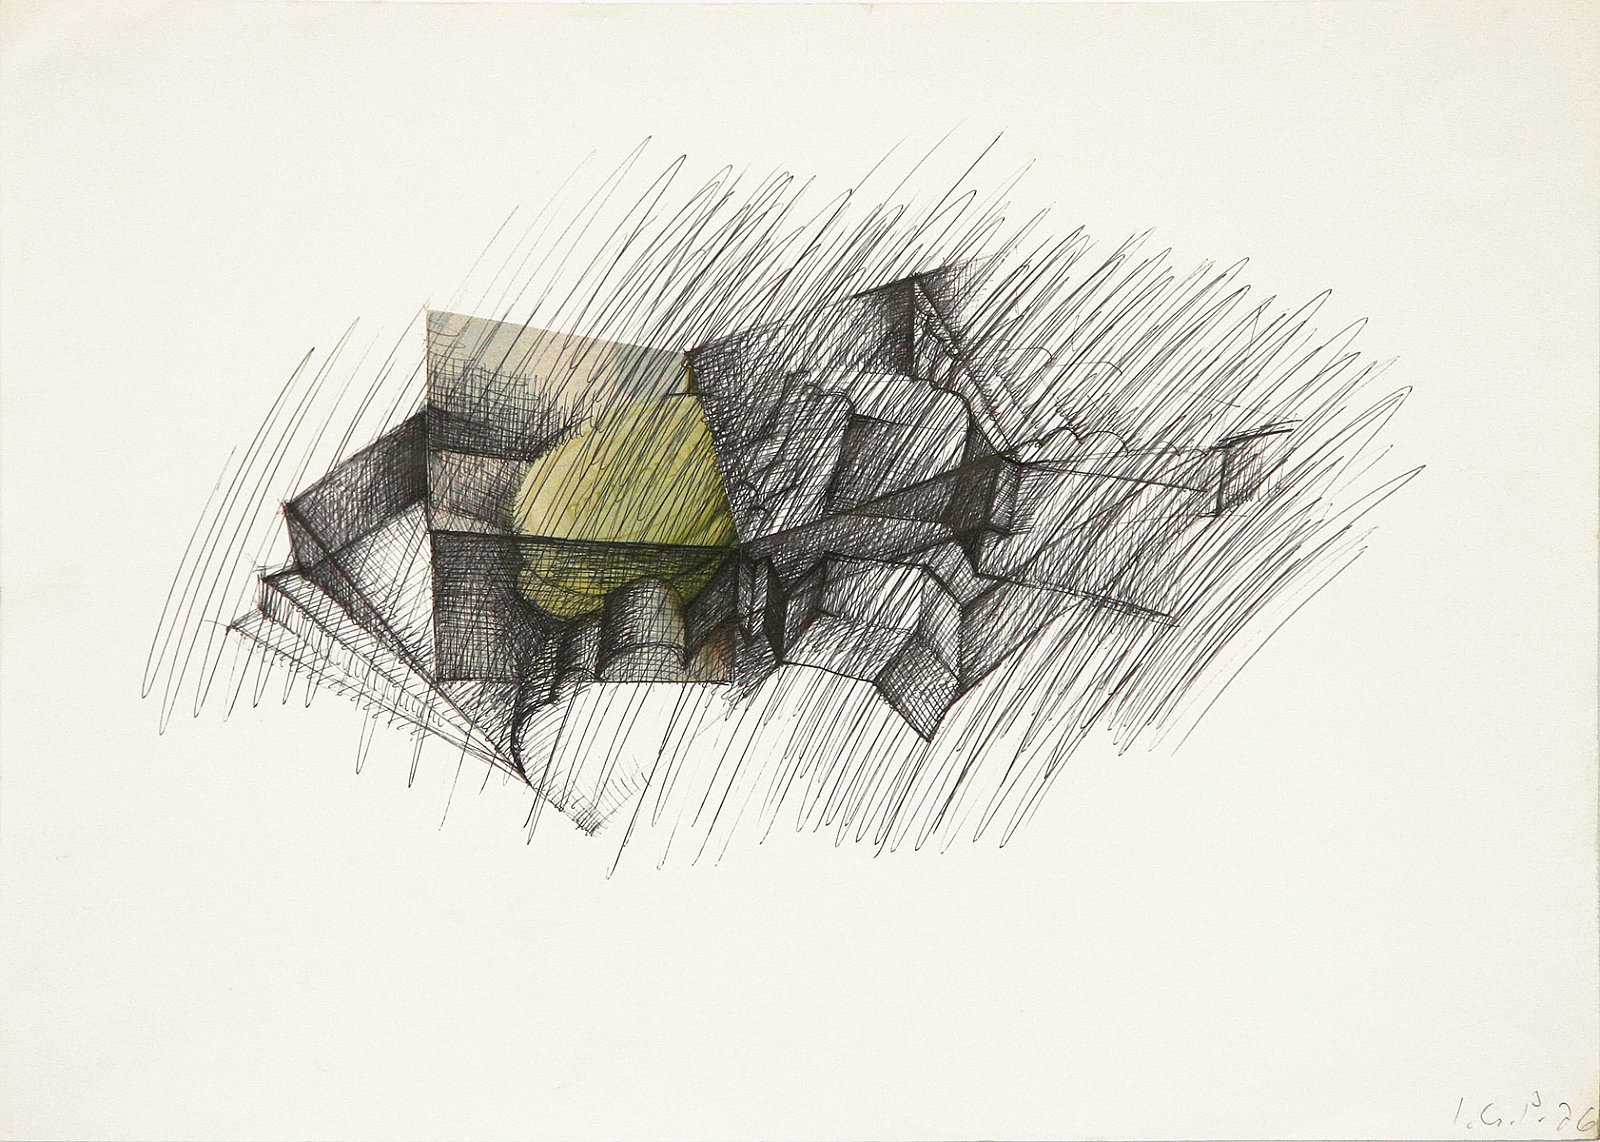 Modified Find, 197634 x 48 cmBallpoint pen, collage on paper